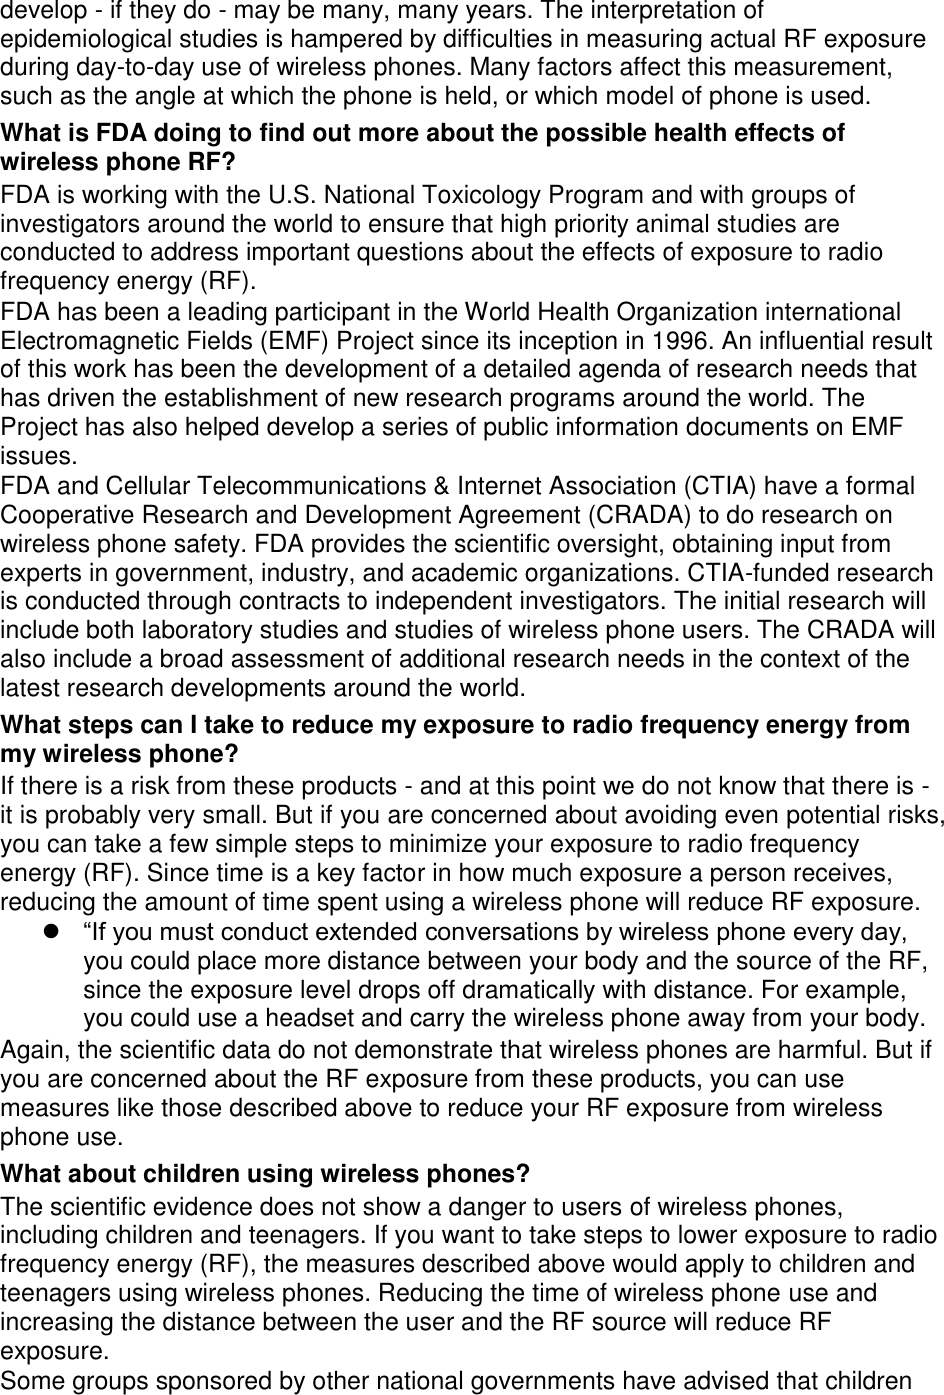 develop - if they do - may be many, many years. The interpretation of epidemiological studies is hampered by difficulties in measuring actual RF exposure during day-to-day use of wireless phones. Many factors affect this measurement, such as the angle at which the phone is held, or which model of phone is used. What is FDA doing to find out more about the possible health effects of wireless phone RF? FDA is working with the U.S. National Toxicology Program and with groups of investigators around the world to ensure that high priority animal studies are conducted to address important questions about the effects of exposure to radio frequency energy (RF). FDA has been a leading participant in the World Health Organization international Electromagnetic Fields (EMF) Project since its inception in 1996. An influential result of this work has been the development of a detailed agenda of research needs that has driven the establishment of new research programs around the world. The Project has also helped develop a series of public information documents on EMF issues. FDA and Cellular Telecommunications &amp; Internet Association (CTIA) have a formal Cooperative Research and Development Agreement (CRADA) to do research on wireless phone safety. FDA provides the scientific oversight, obtaining input from experts in government, industry, and academic organizations. CTIA-funded research is conducted through contracts to independent investigators. The initial research will include both laboratory studies and studies of wireless phone users. The CRADA will also include a broad assessment of additional research needs in the context of the latest research developments around the world. What steps can I take to reduce my exposure to radio frequency energy from my wireless phone? If there is a risk from these products - and at this point we do not know that there is - it is probably very small. But if you are concerned about avoiding even potential risks, you can take a few simple steps to minimize your exposure to radio frequency energy (RF). Since time is a key factor in how much exposure a person receives, reducing the amount of time spent using a wireless phone will reduce RF exposure.  “If you must conduct extended conversations by wireless phone every day, you could place more distance between your body and the source of the RF, since the exposure level drops off dramatically with distance. For example, you could use a headset and carry the wireless phone away from your body. Again, the scientific data do not demonstrate that wireless phones are harmful. But if you are concerned about the RF exposure from these products, you can use measures like those described above to reduce your RF exposure from wireless phone use. What about children using wireless phones? The scientific evidence does not show a danger to users of wireless phones, including children and teenagers. If you want to take steps to lower exposure to radio frequency energy (RF), the measures described above would apply to children and teenagers using wireless phones. Reducing the time of wireless phone use and increasing the distance between the user and the RF source will reduce RF exposure. Some groups sponsored by other national governments have advised that children 